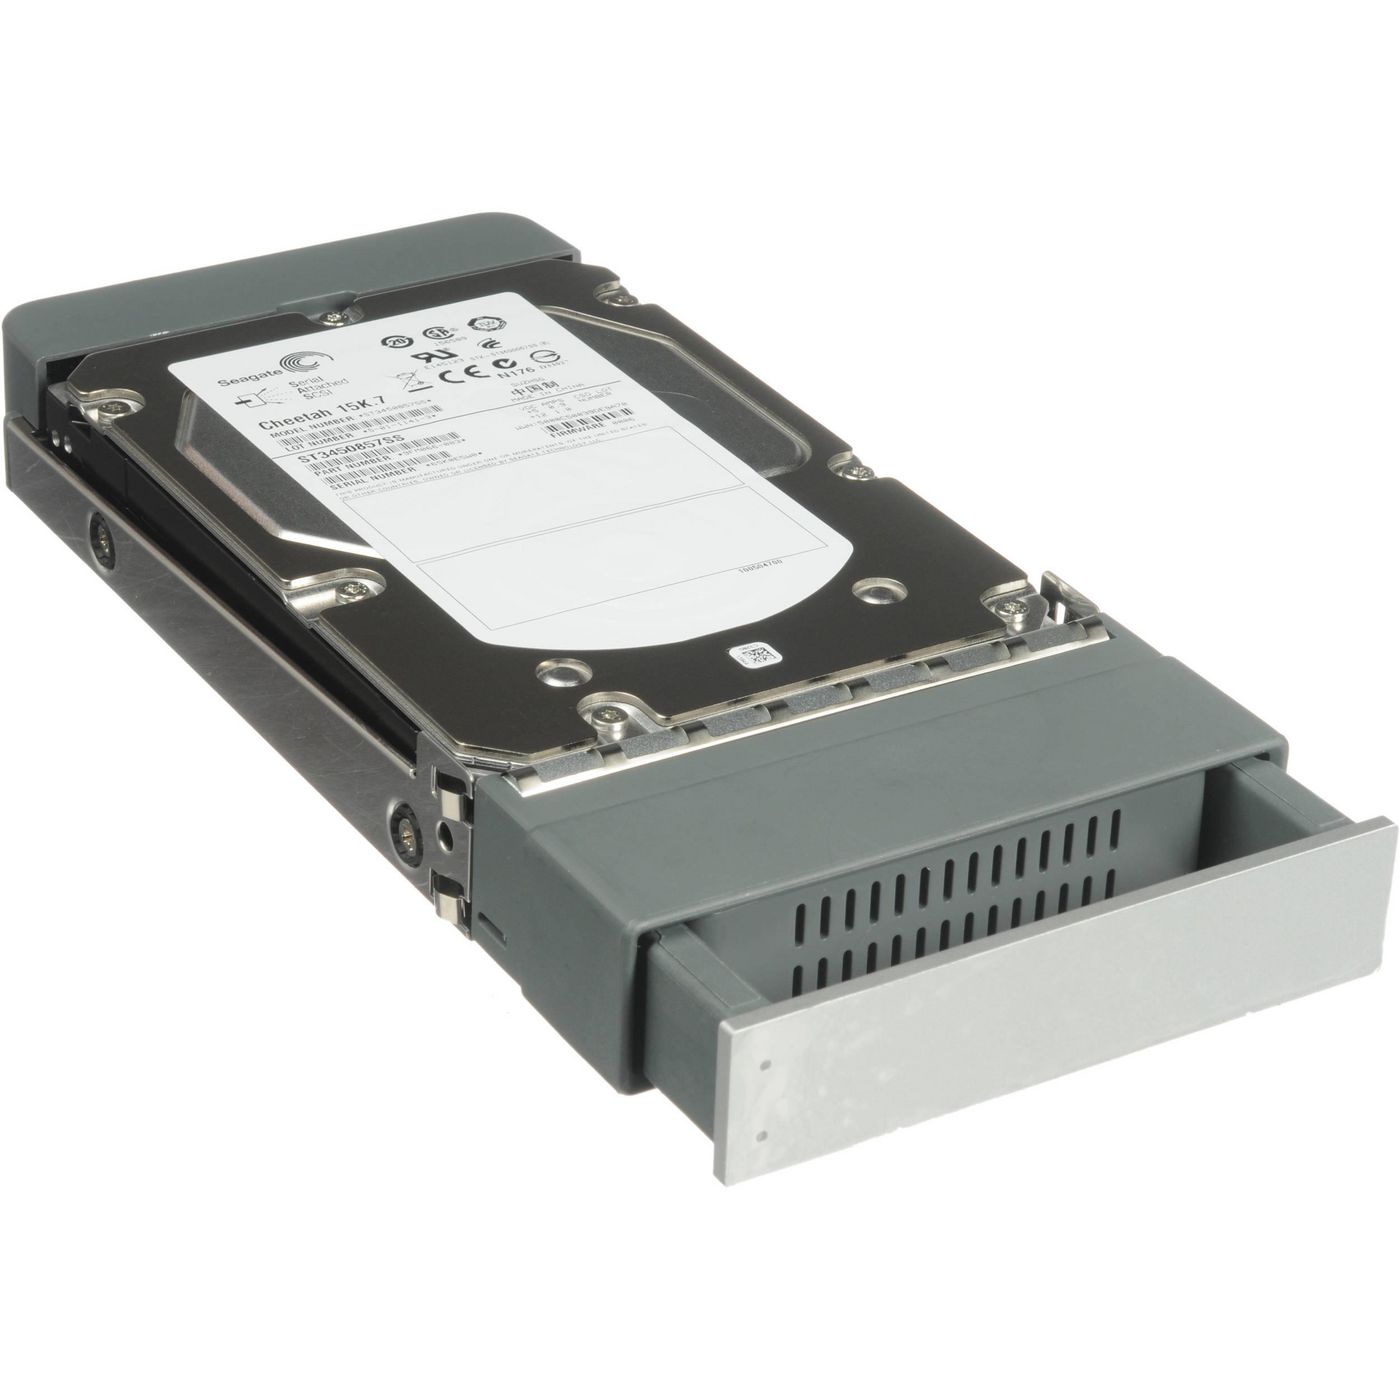 Promise-Technology F40VA2S15000000 4TB SATA HDD 3.5 inch with 